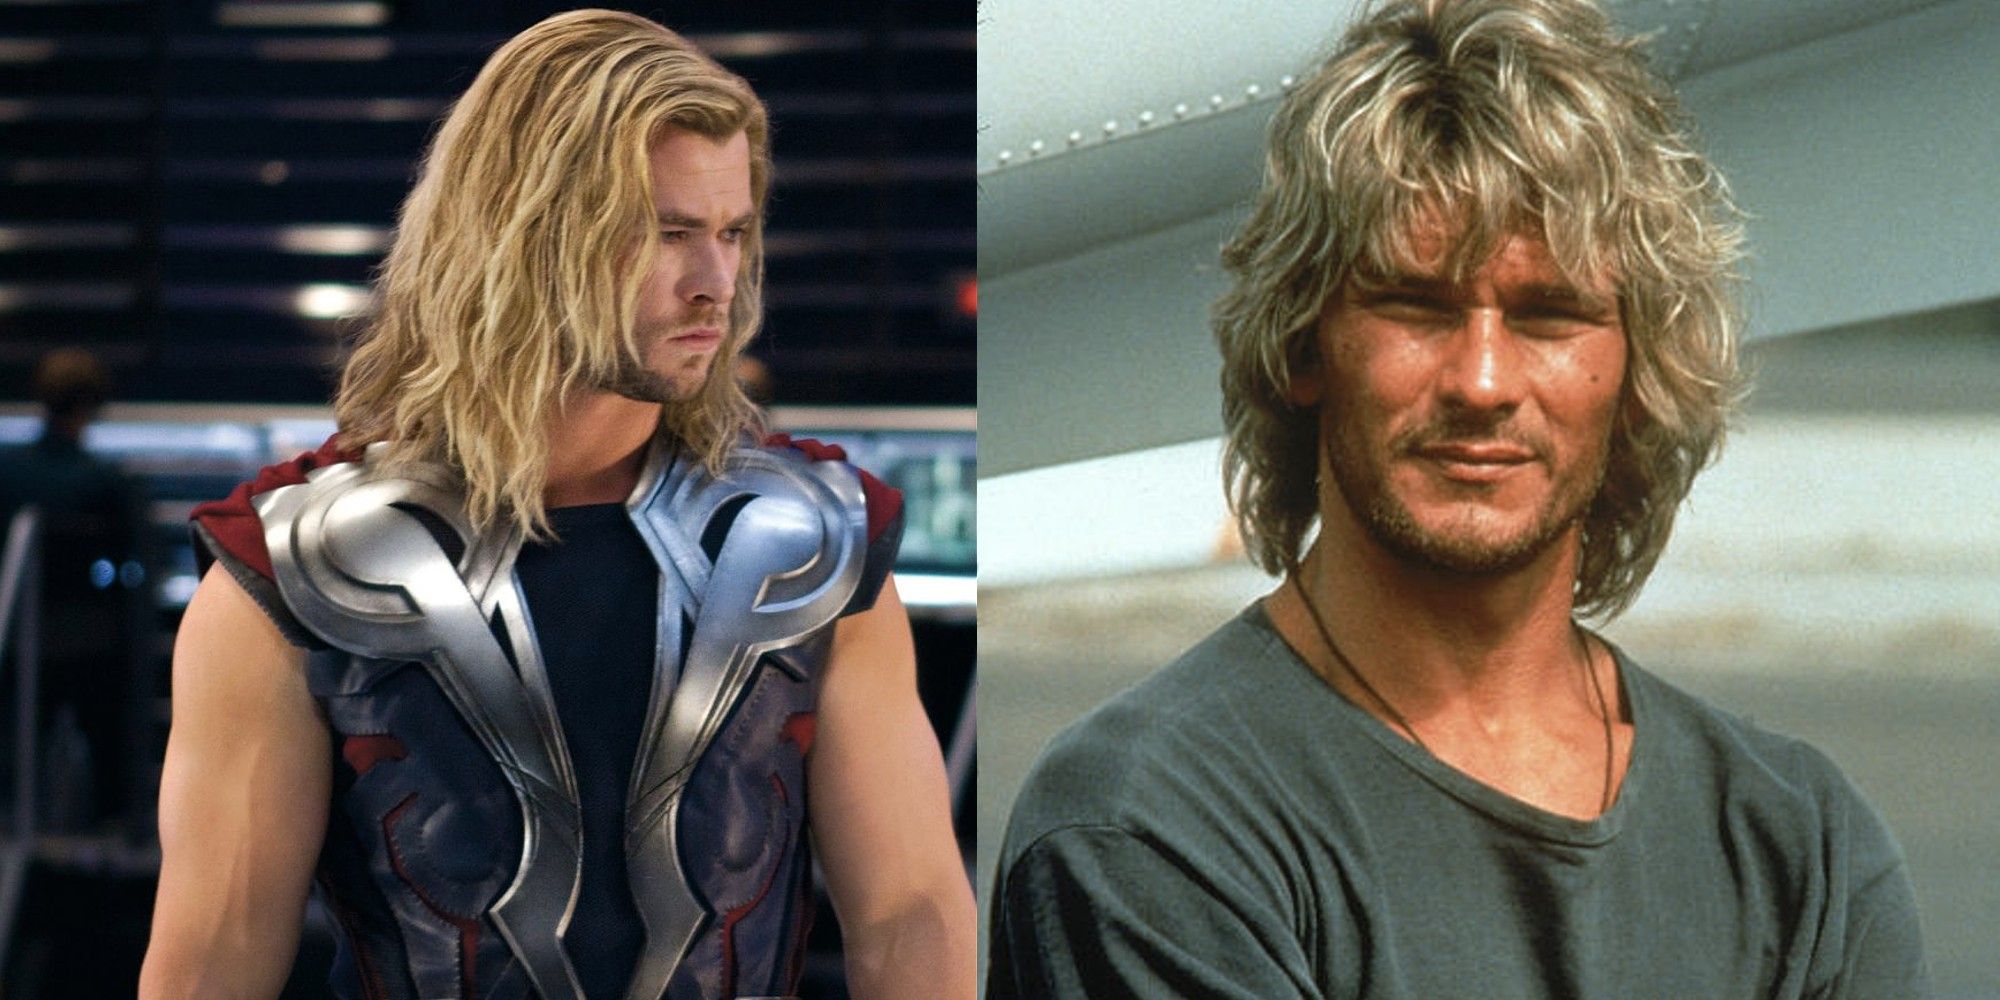 Left to right: Thor in Avengers and Bodhi in Point Break